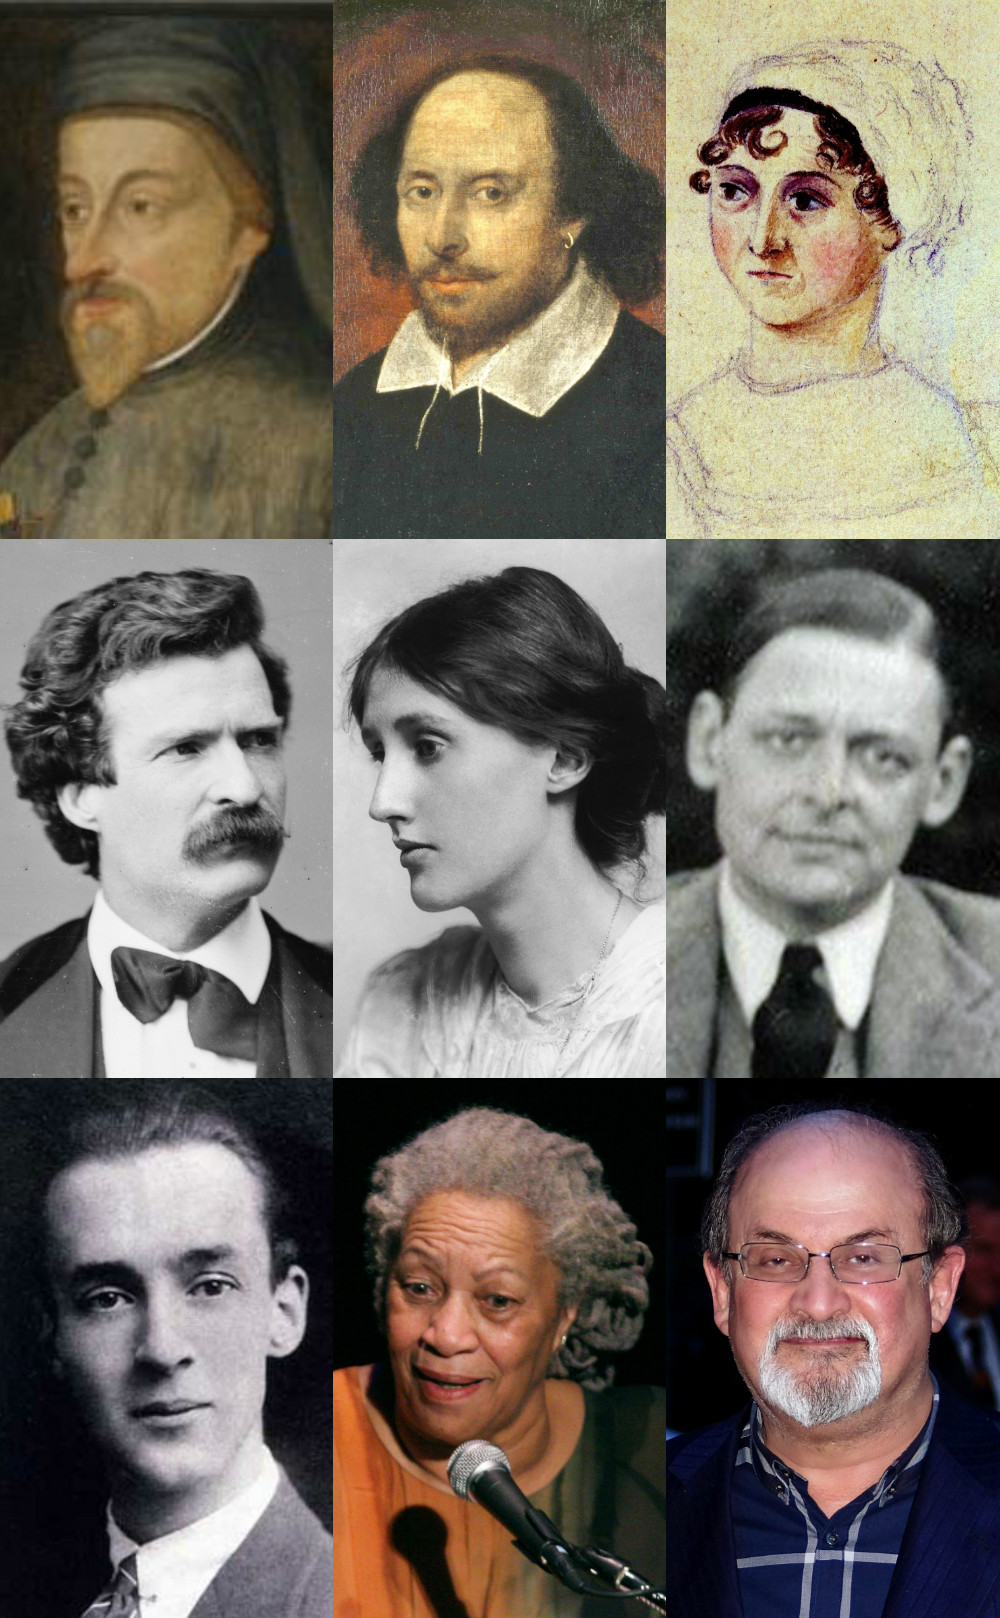 famous essay writers and their works